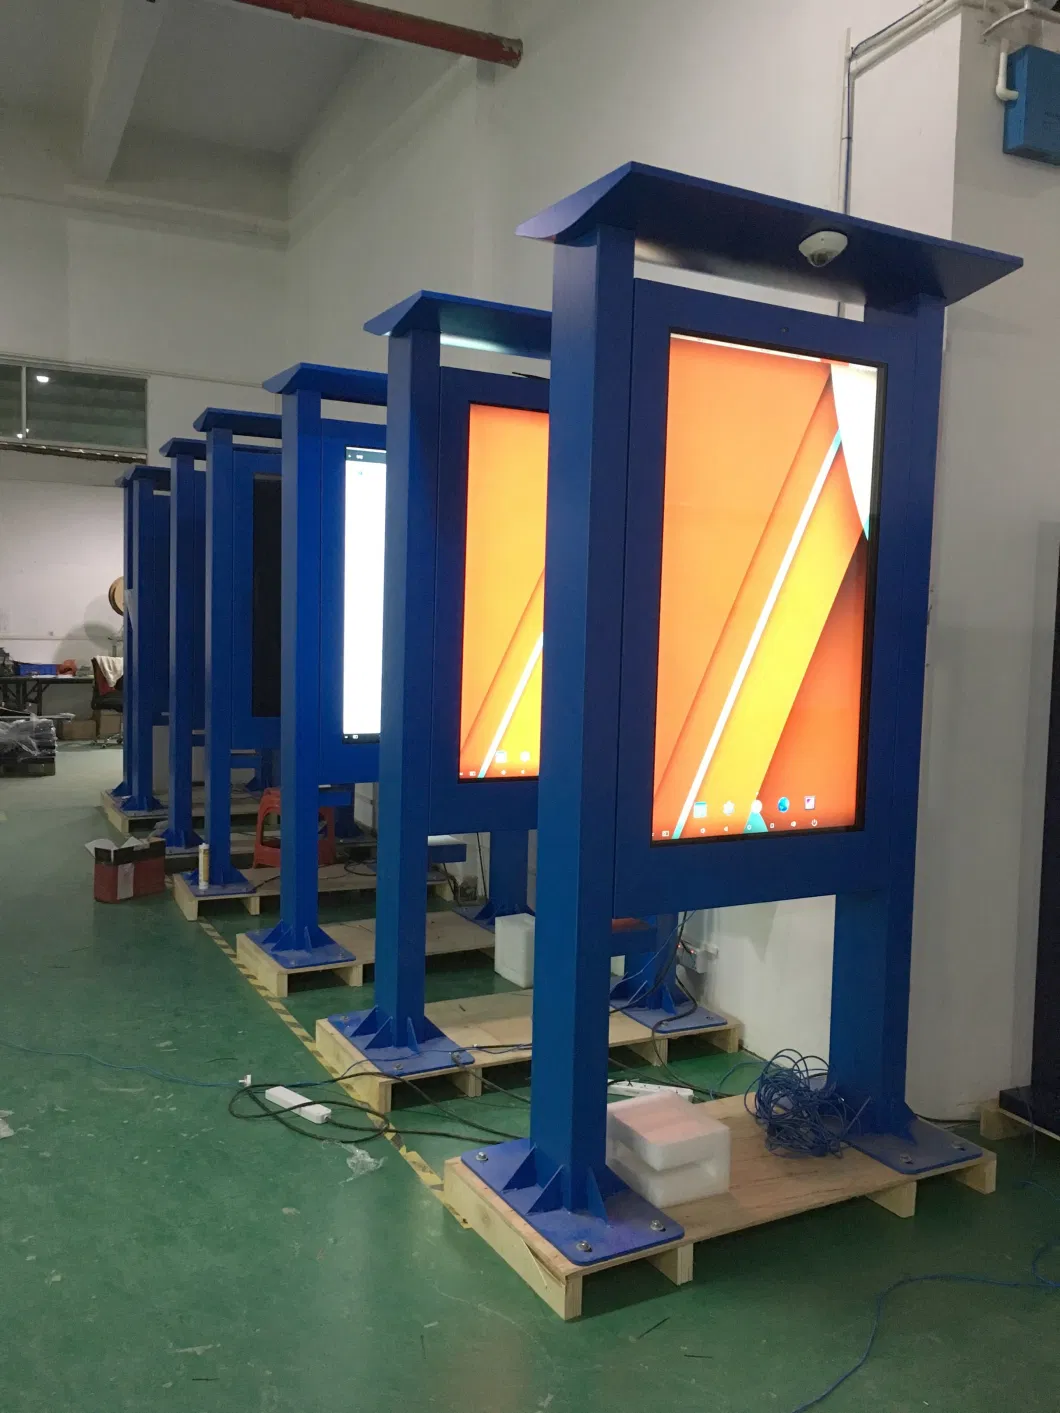 ODM Advertising Screen Air-Cooled Horizontal Screen Wall Hanging Outdoor Advertising Machine 55 Inch Ultra Thin Advertising Kiosk 2 Year Warranty Monitor